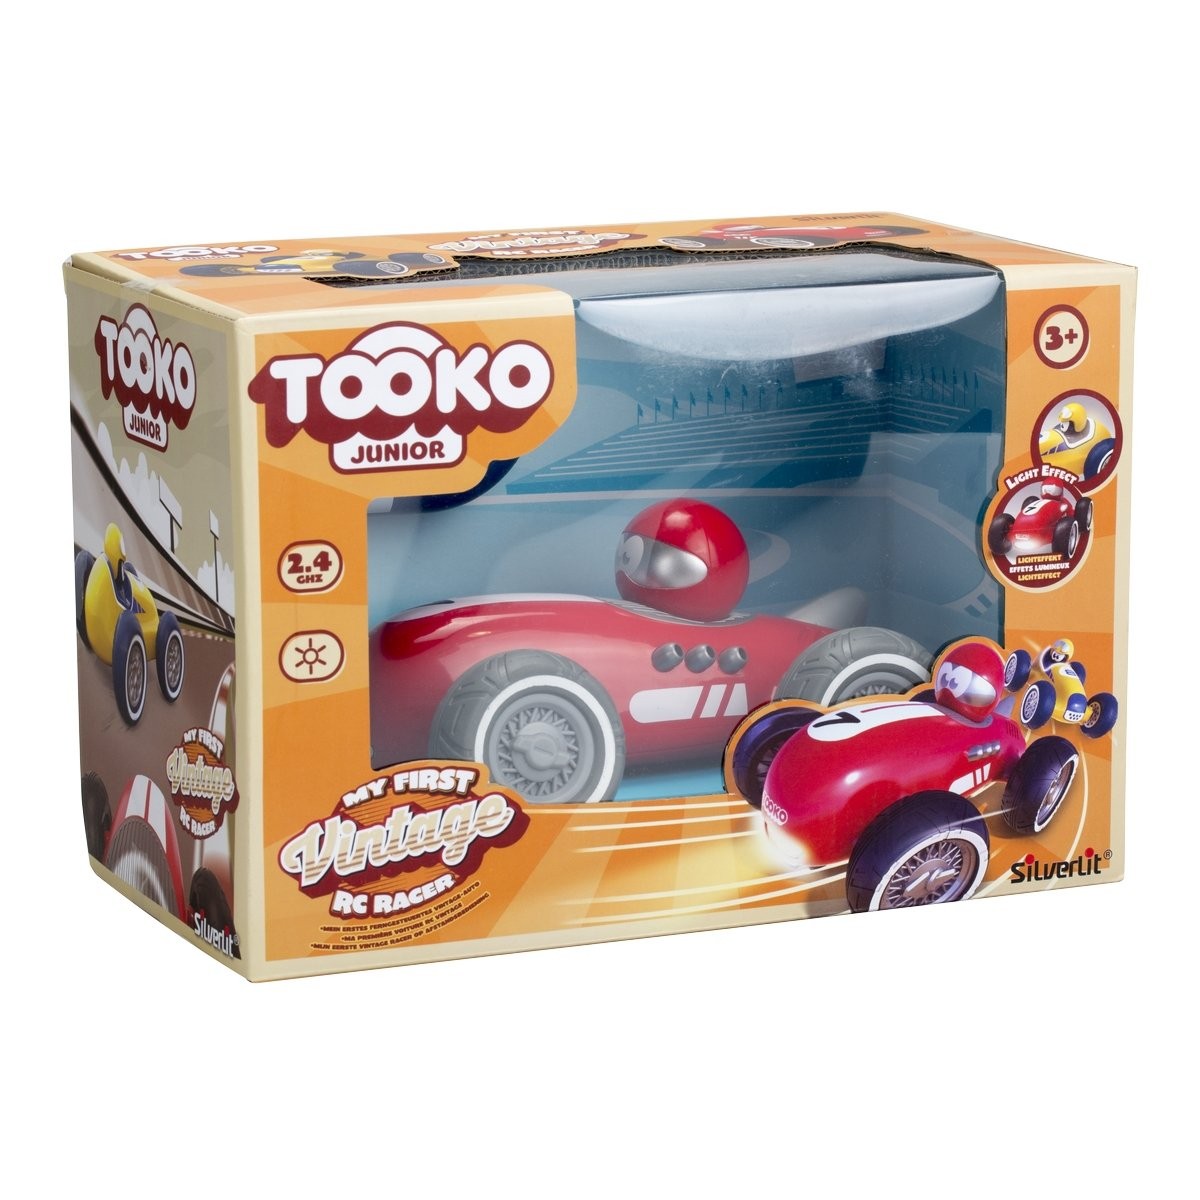 Tooko - voiture telecommandee rose fonction suis moi, vehicules-garages